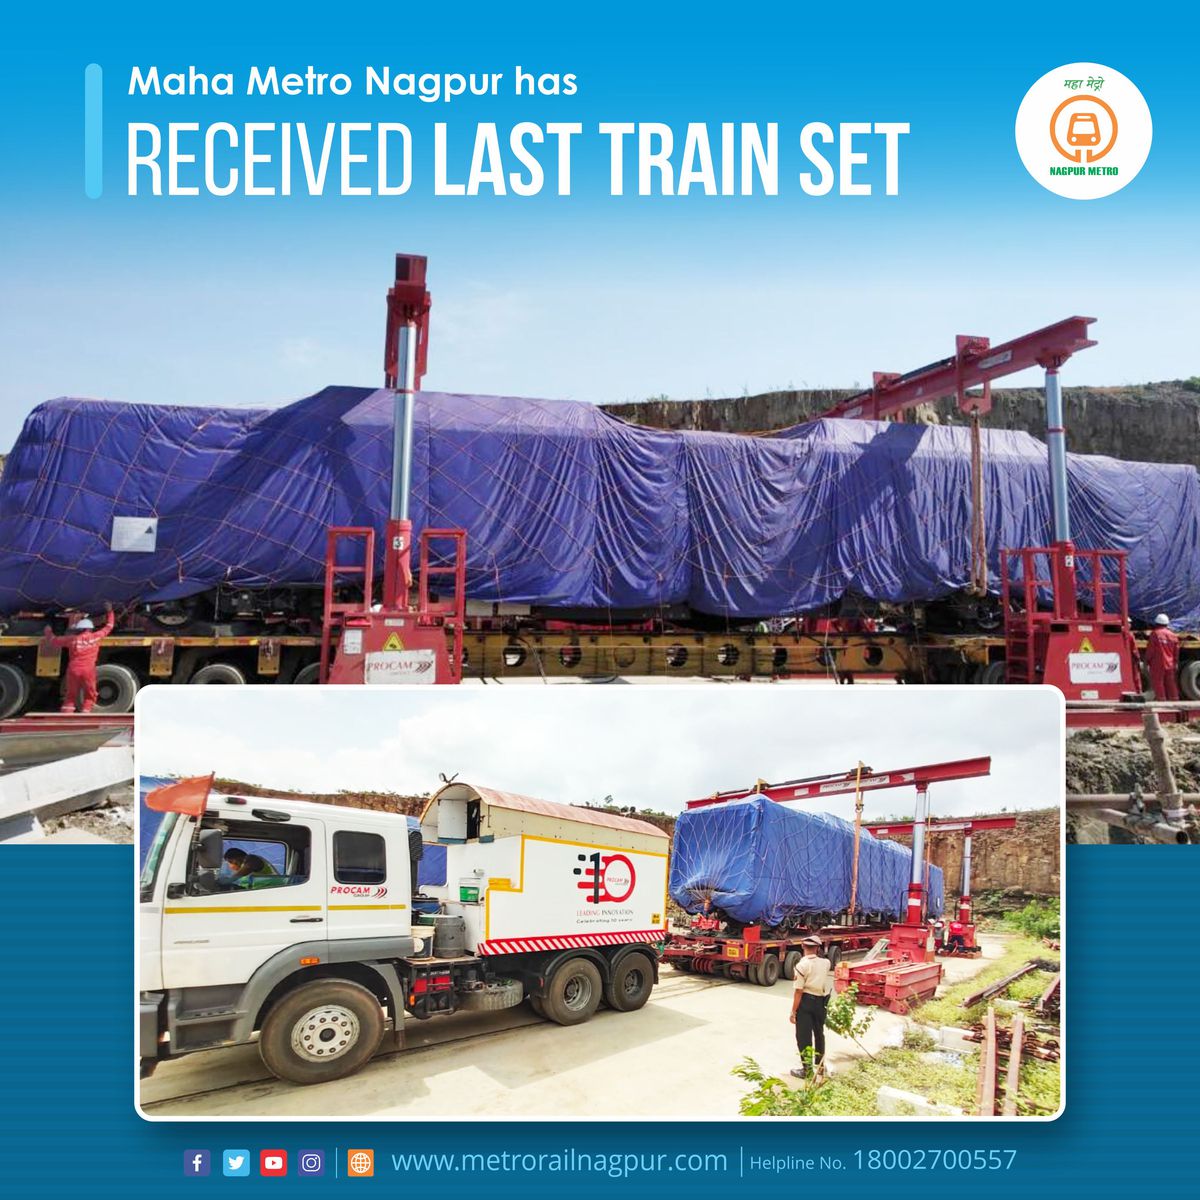 #ReasonToSmile #Spirit of #NagpurMetro work during #Covid19 Pandemic
#EyeForFuture #unlockduringlockdown 

#MahaMetro received the last train set for #NagpurMetro Rail Project Phase-I from China Railway Rolling Stock Corporation (CRRC), which was unloaded at #HingnaDepot.